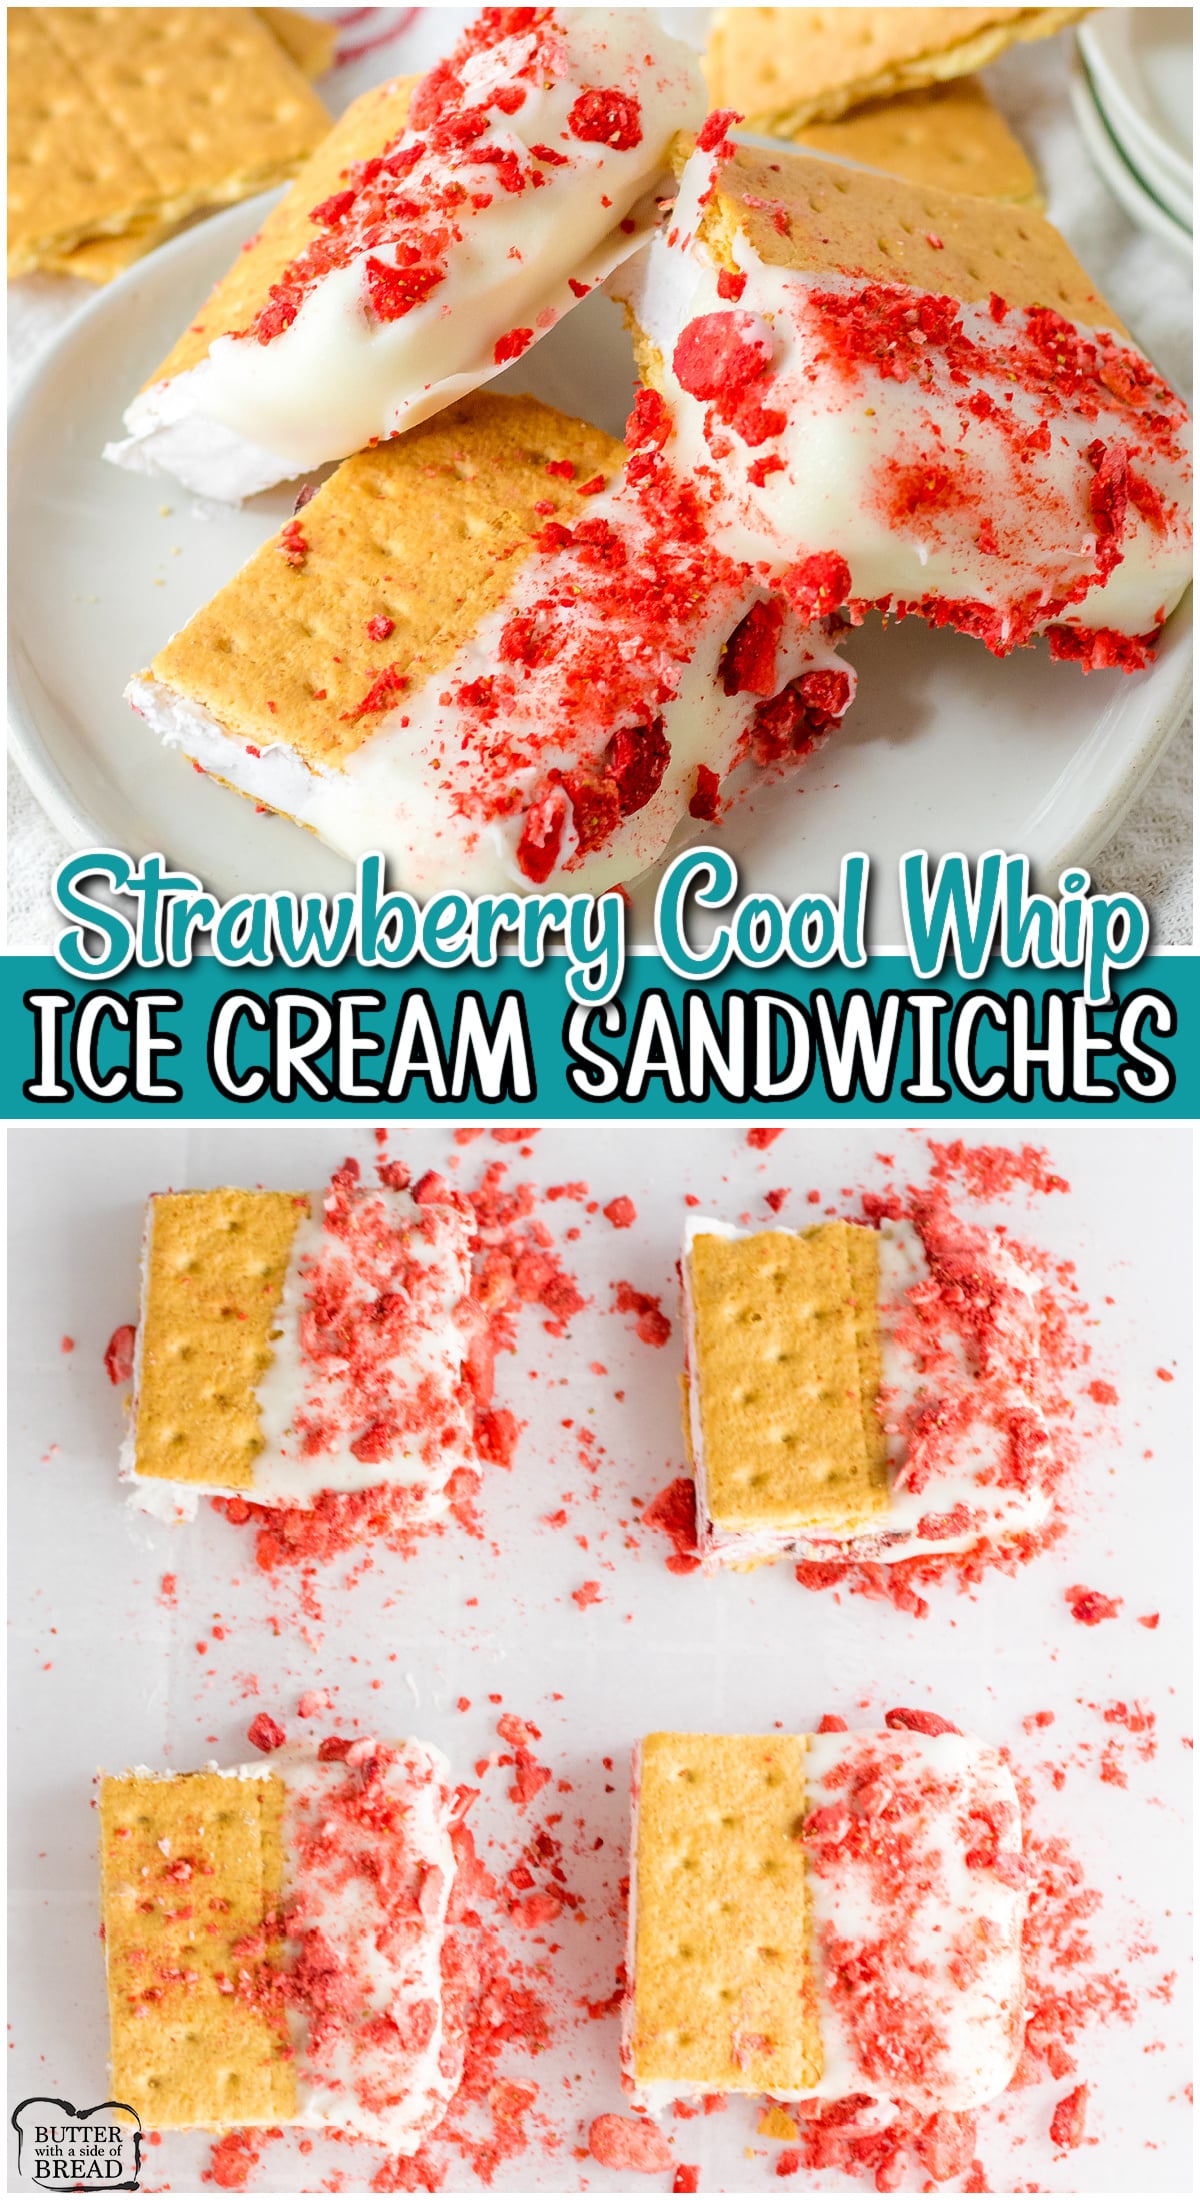 Strawberry Cool Whip Ice Cream Sandwiches made easy with just 5 ingredients! Chilled, refreshing graham cracker sandwiches with bright strawberry flavor everyone loves!